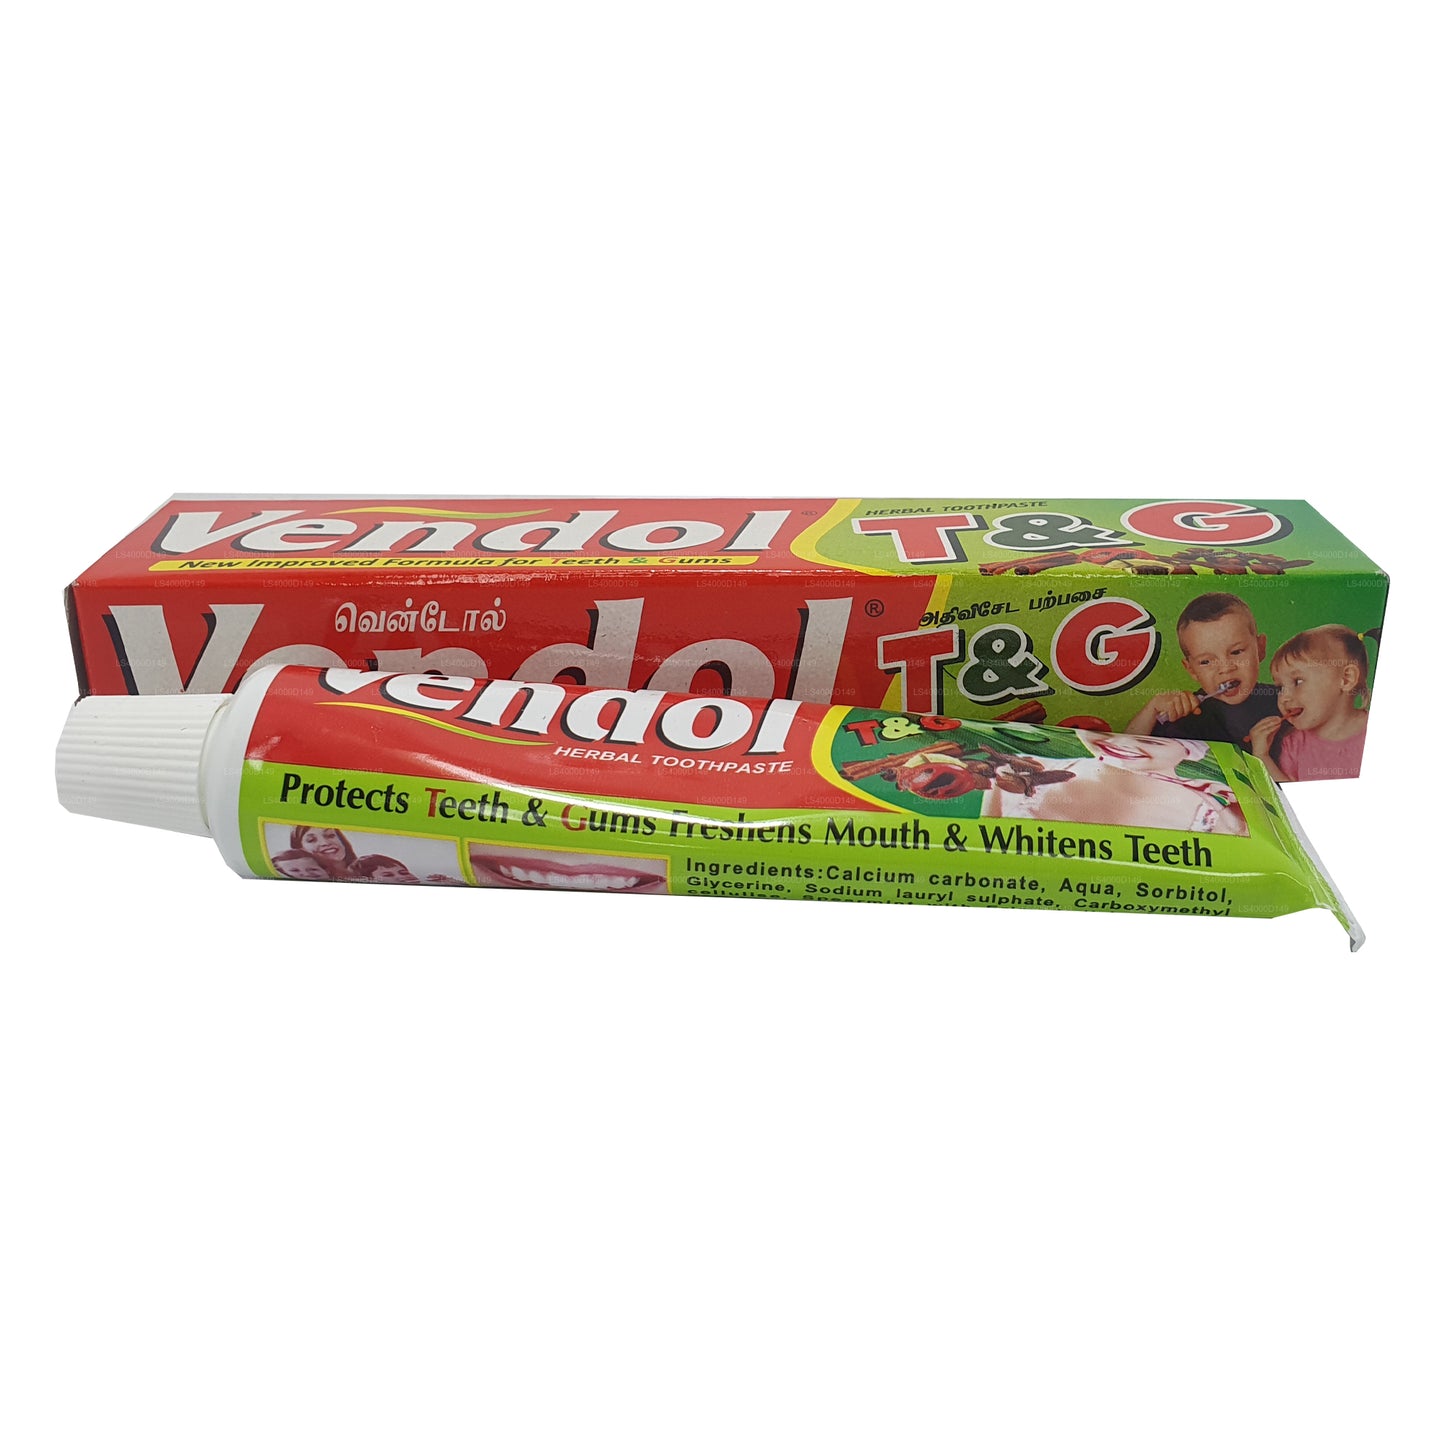 Vendol T and G Toothpaste